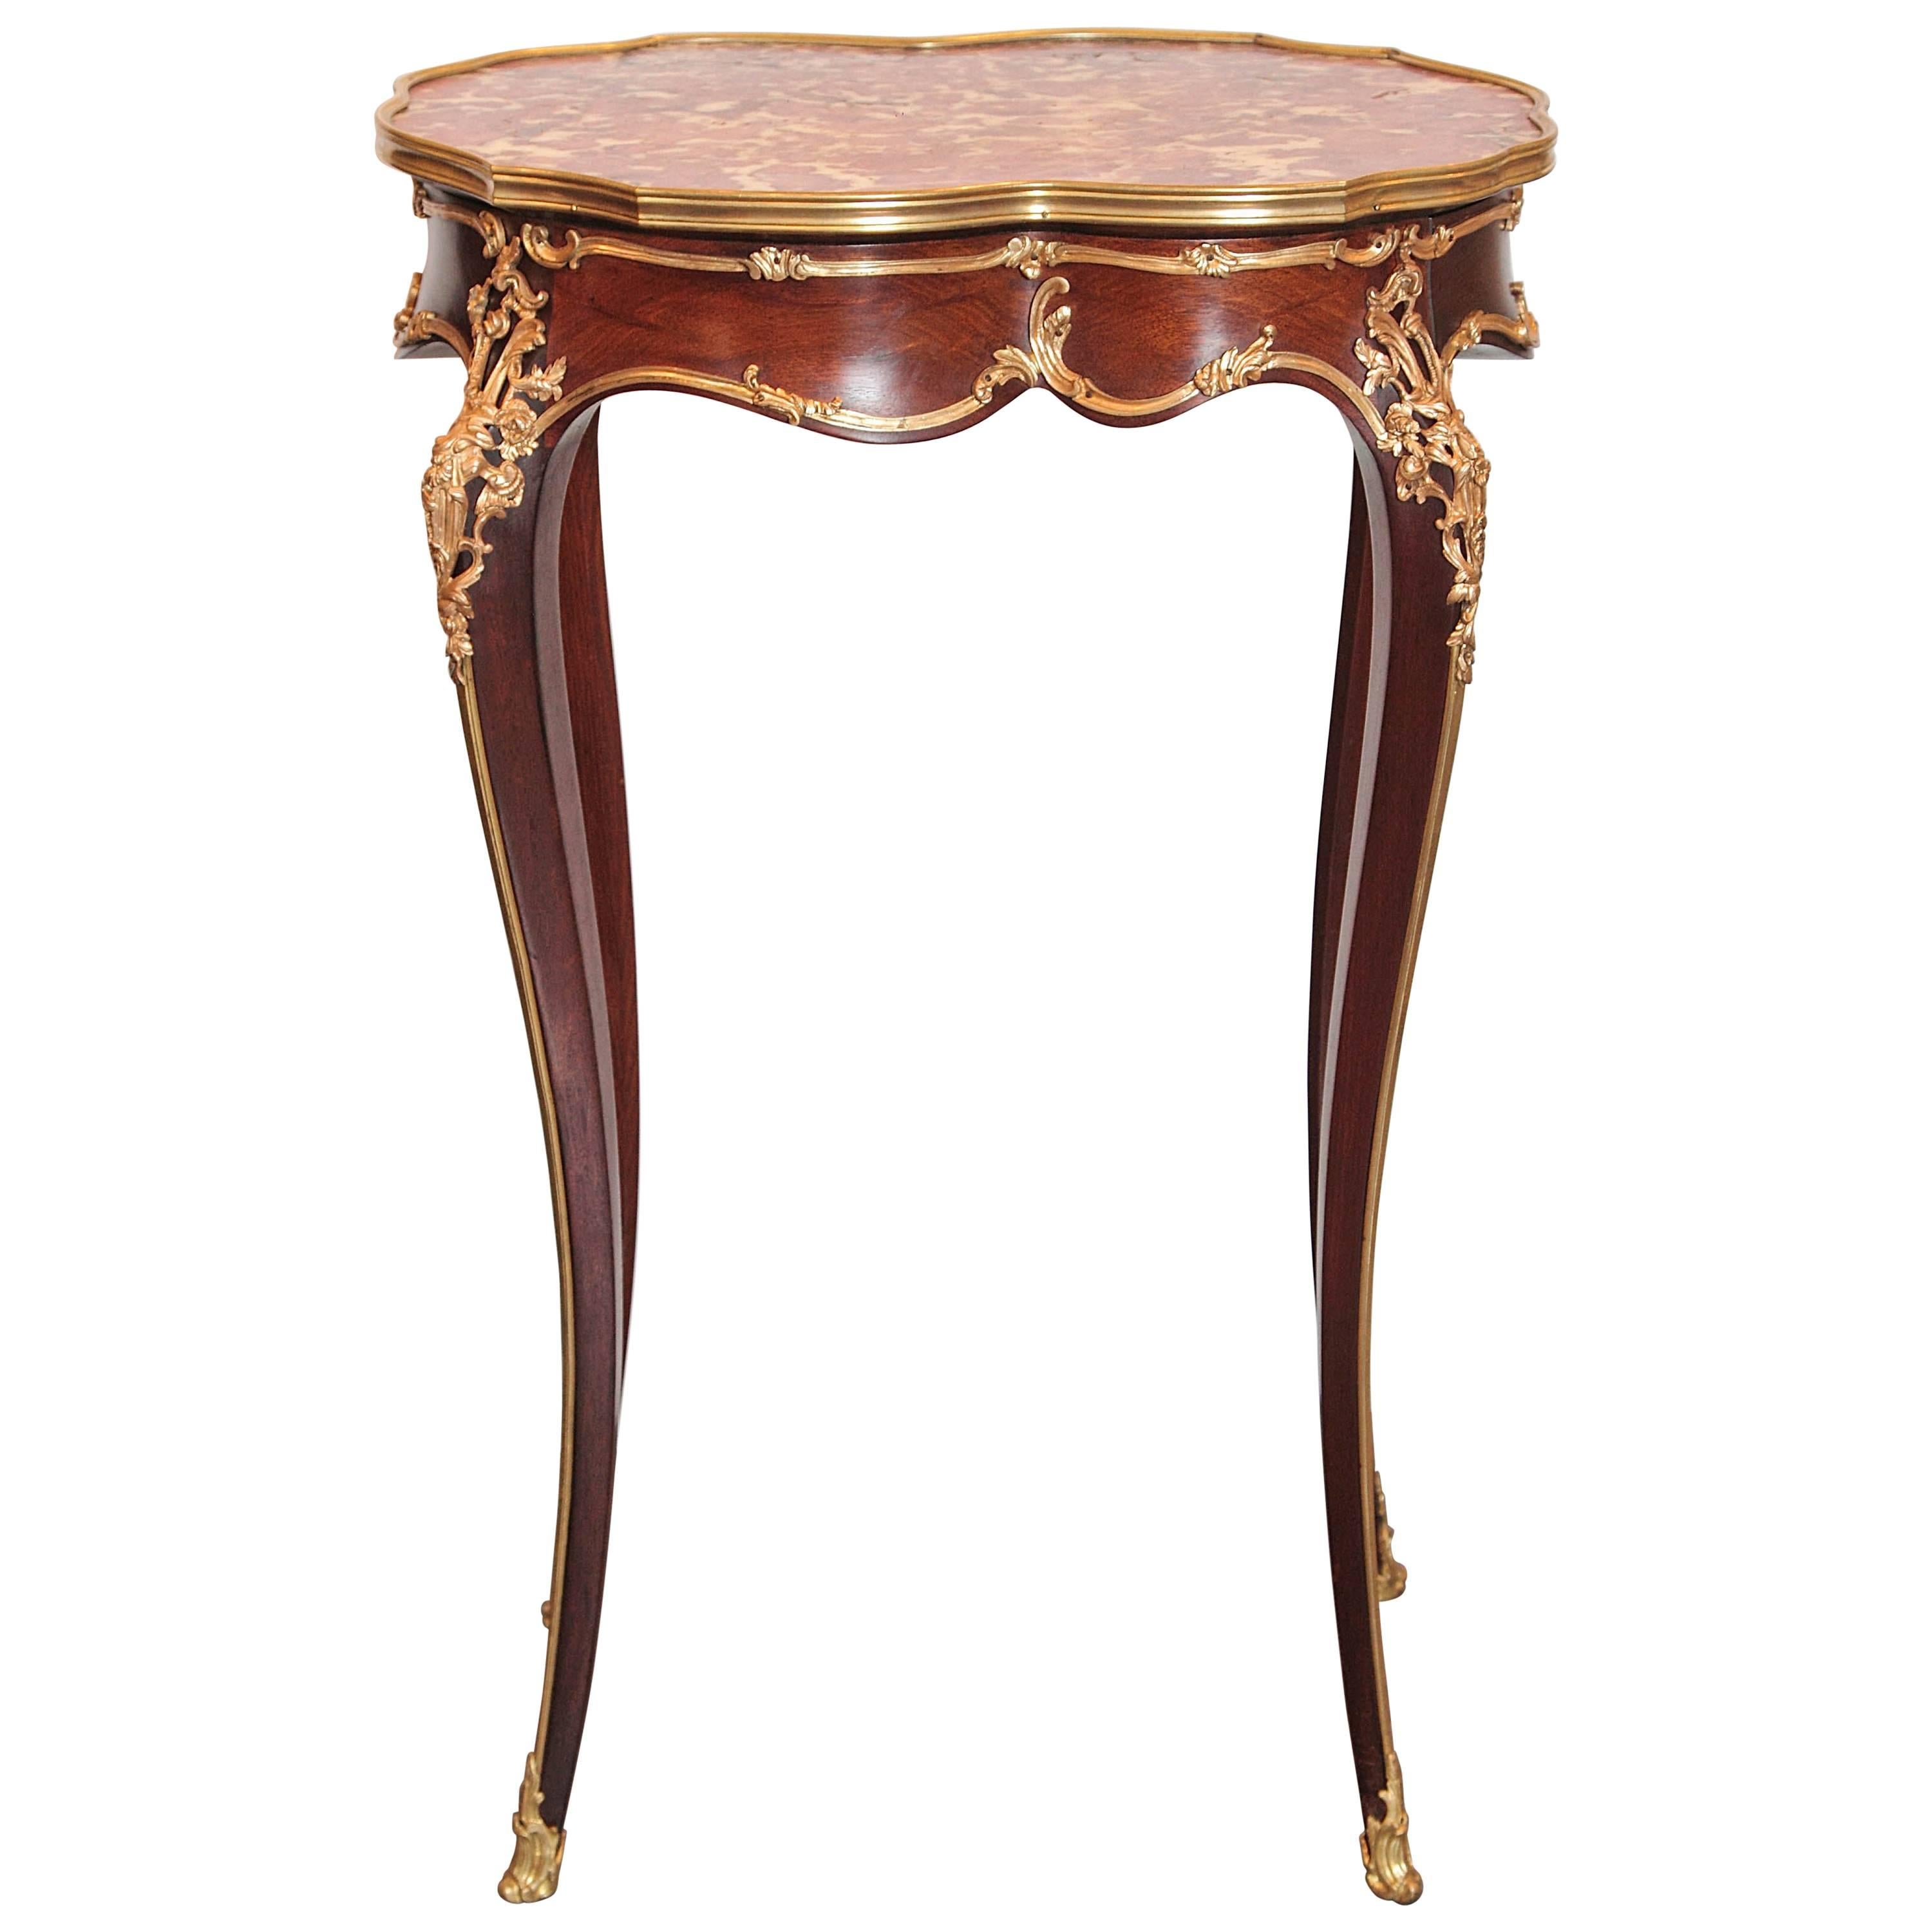 19th Century, French, Louis XV Mahogany and Gilt Bronze Side Table